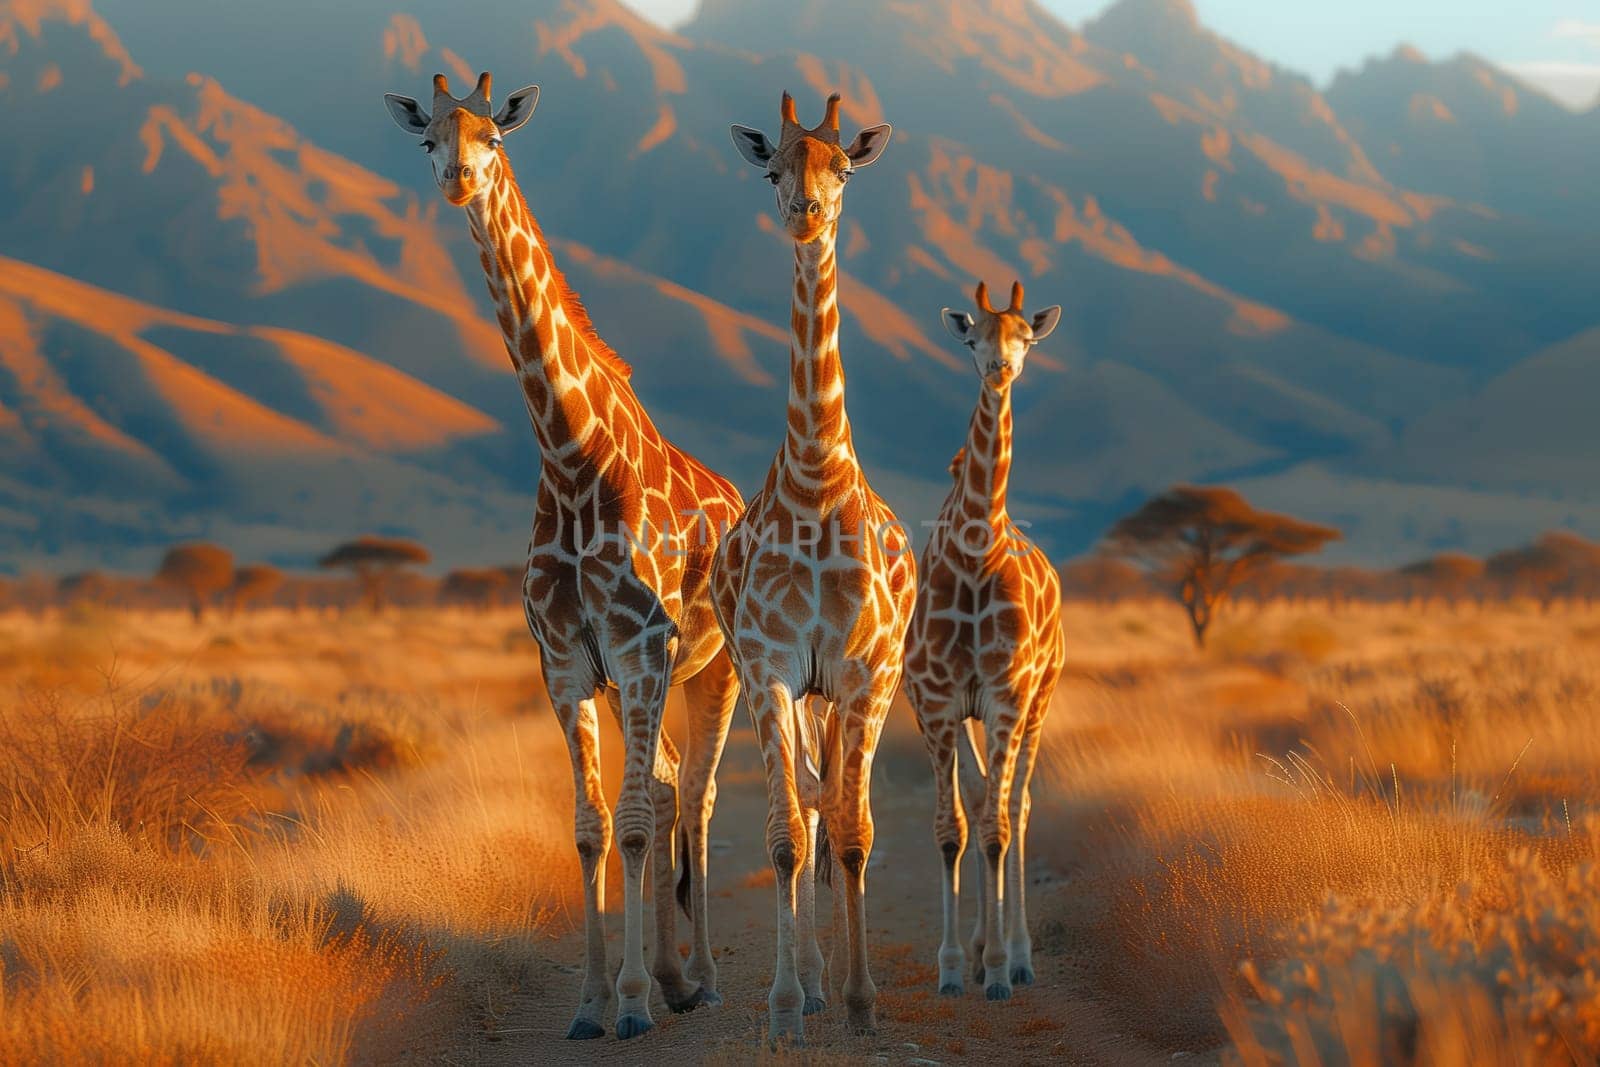 Three Giraffidae are grazing in a grassland surrounded by a plant community, with mountains and a clear sky in the background, showcasing their adaptation to the natural landscape